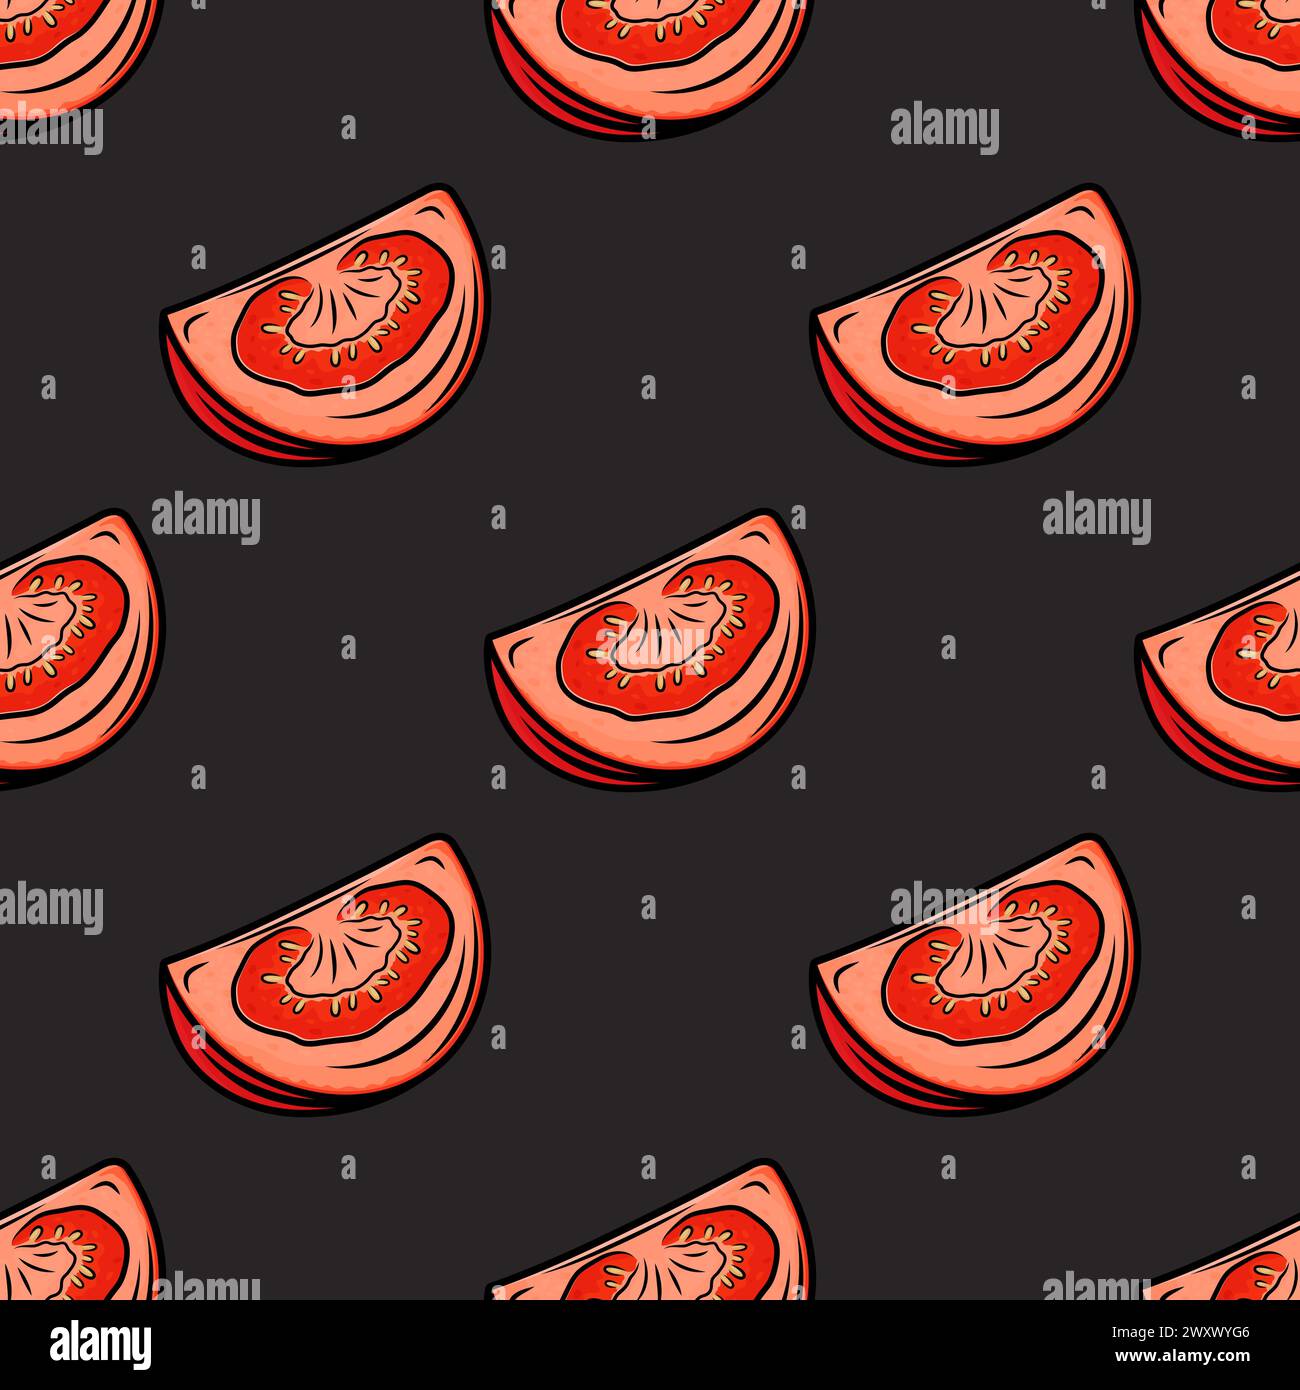 Flat Vector Seamless Pattern with Fresh Tomato on a Black Background. Seamless Vegetable Print with Whole Tomatoes Stock Vector